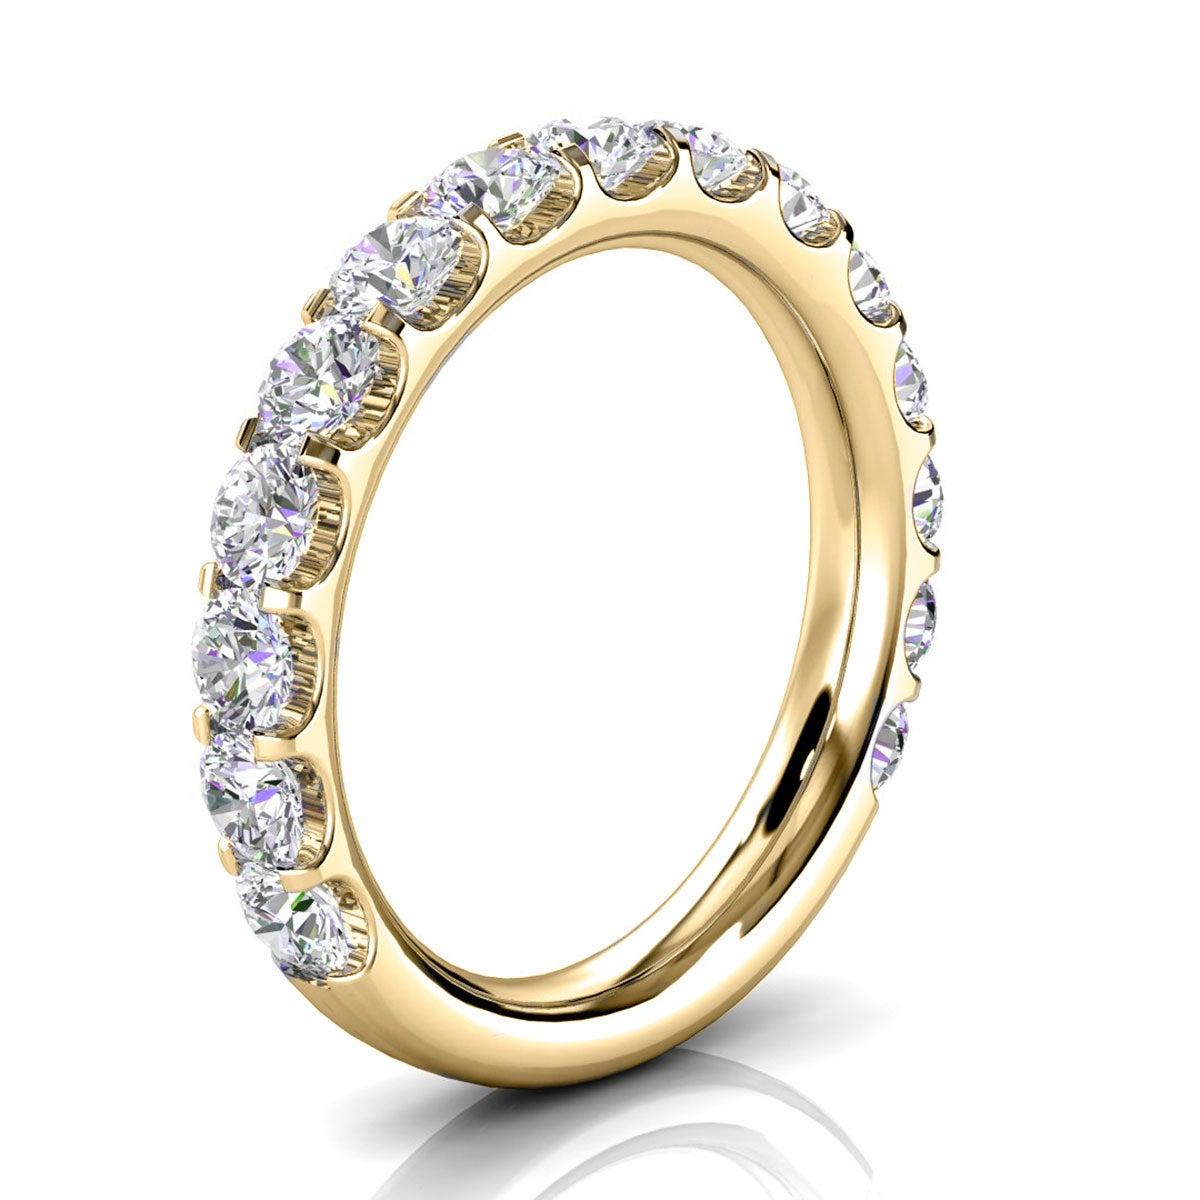 For Sale:  14k Yellow Gold Carole Micro-Prong Diamond Ring '1 1/2 Ct. tw' 2